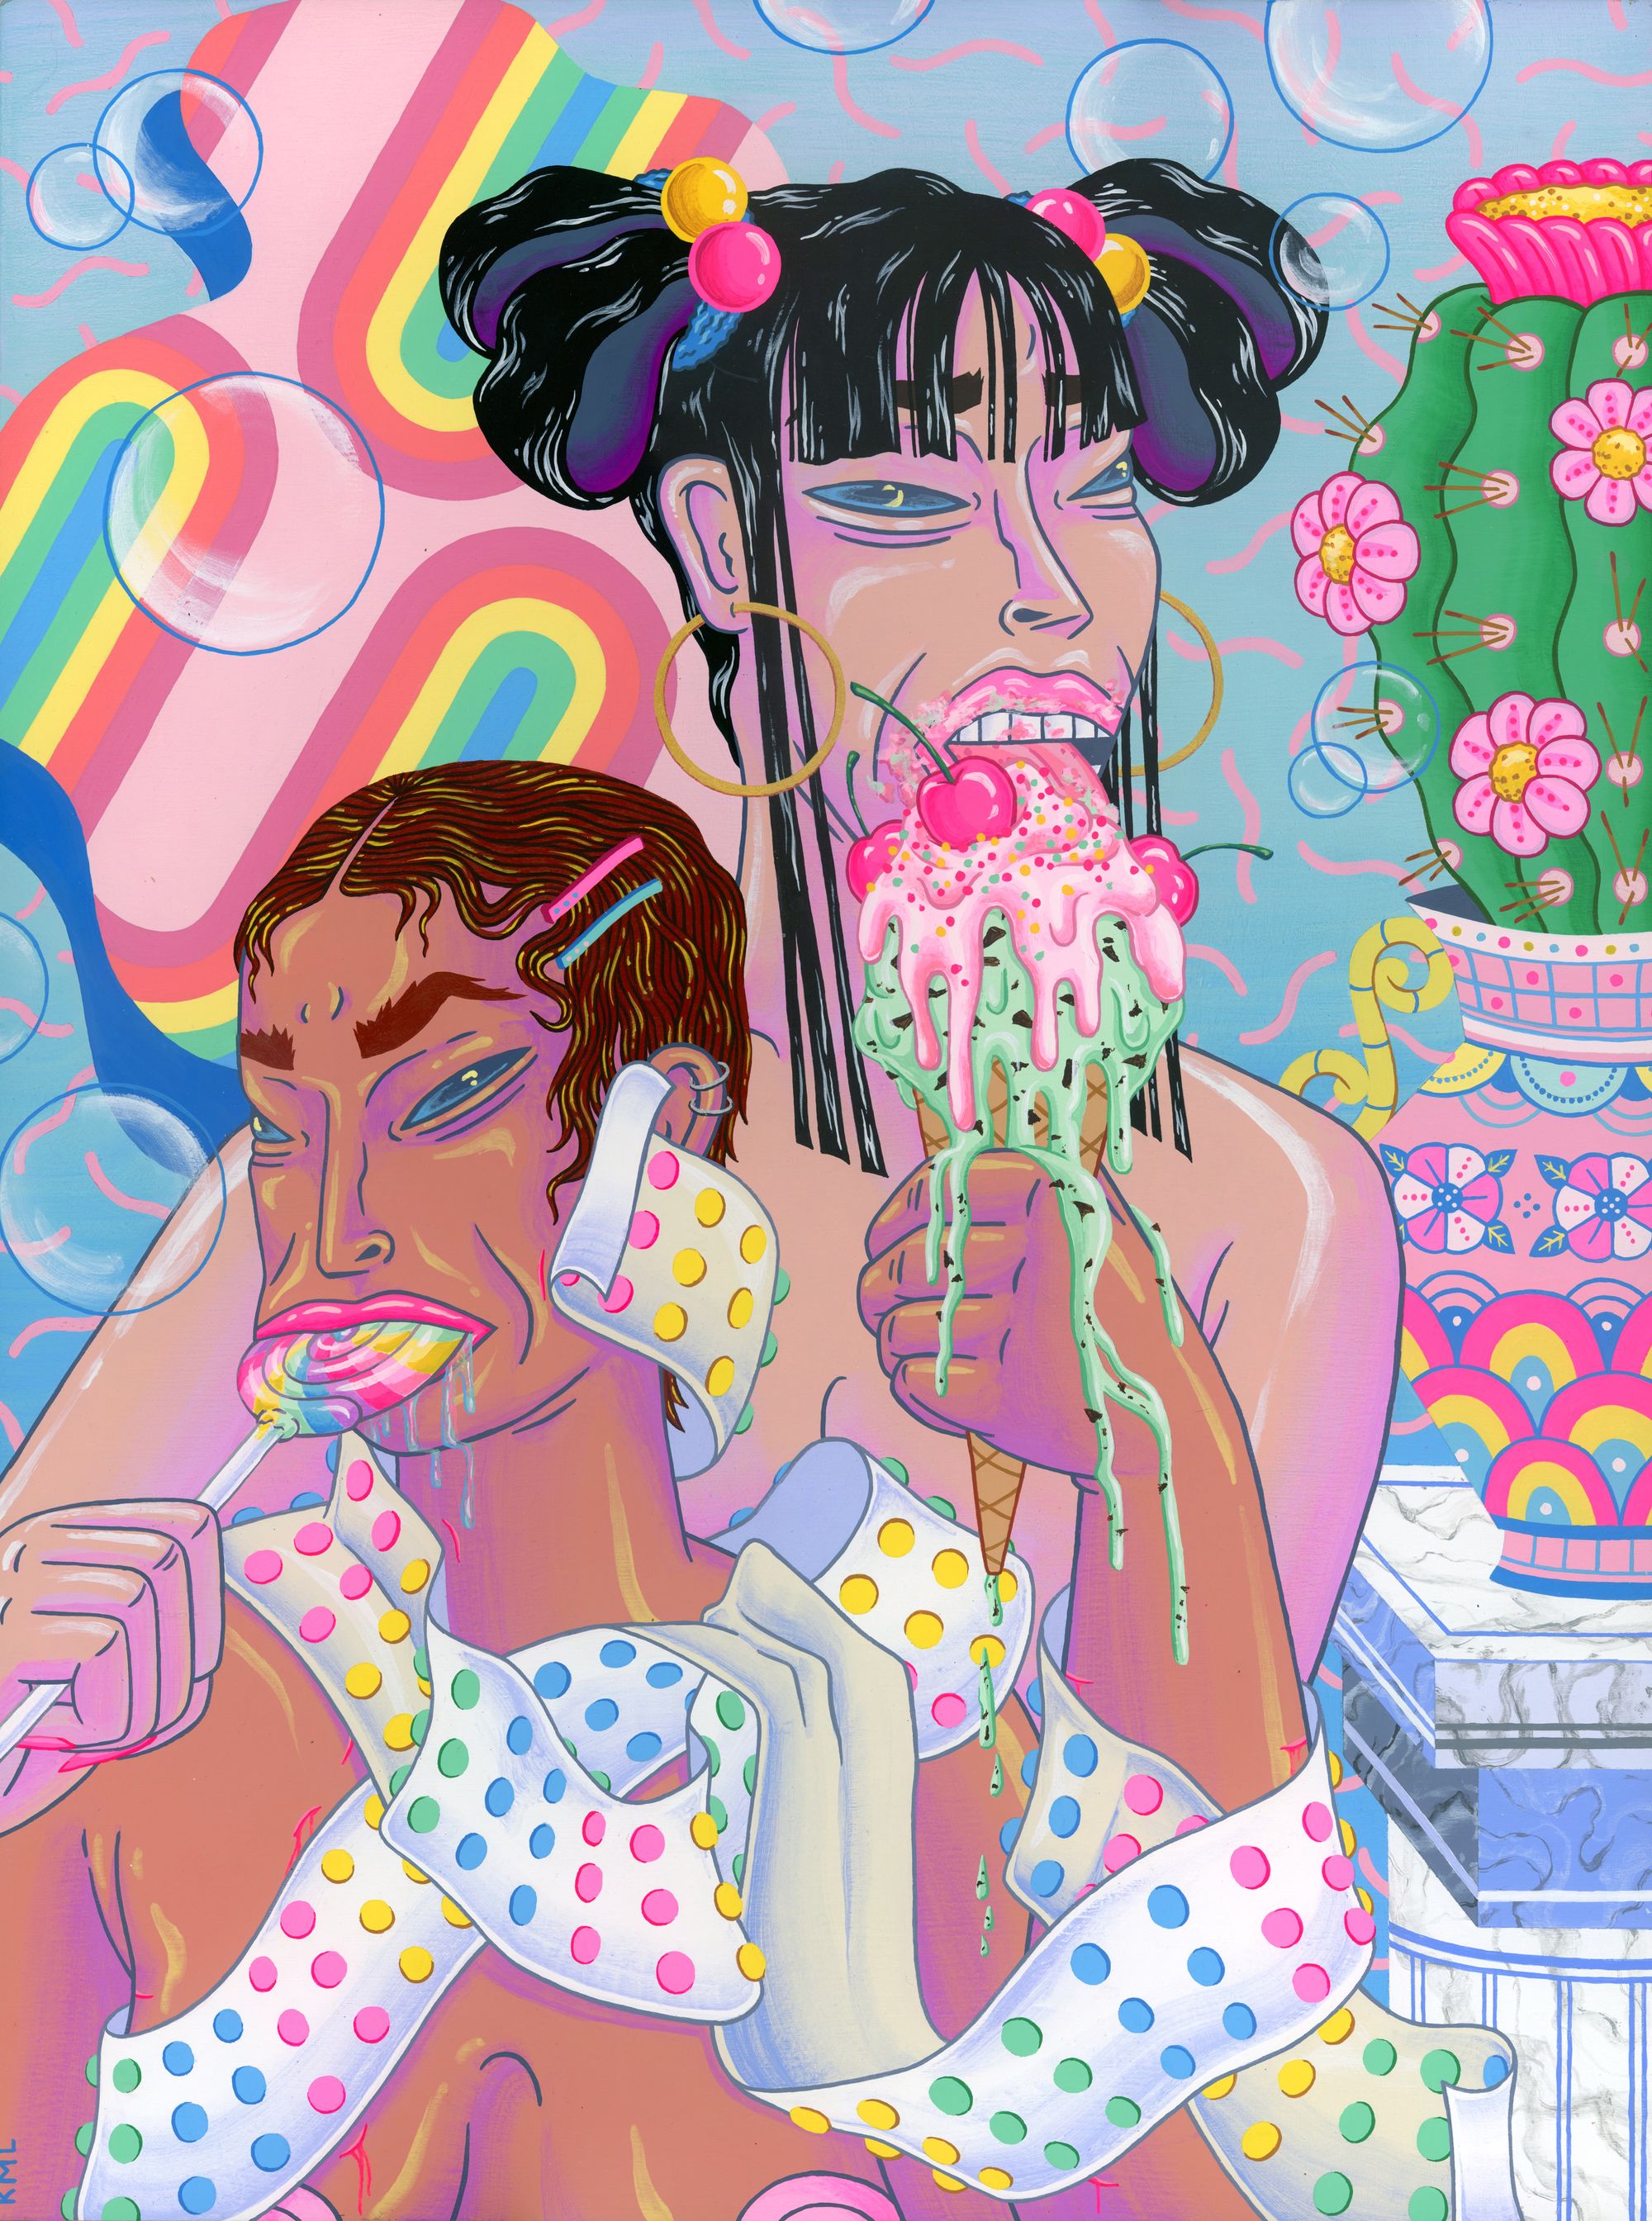 Painter and illustrator Kristen Liu-Wong's painting titled The Sugar Rush depicts two nude women from the chest up surrounded by clear bubbles and both consuming sweets - one a lollipop and one an ice cream cone. 